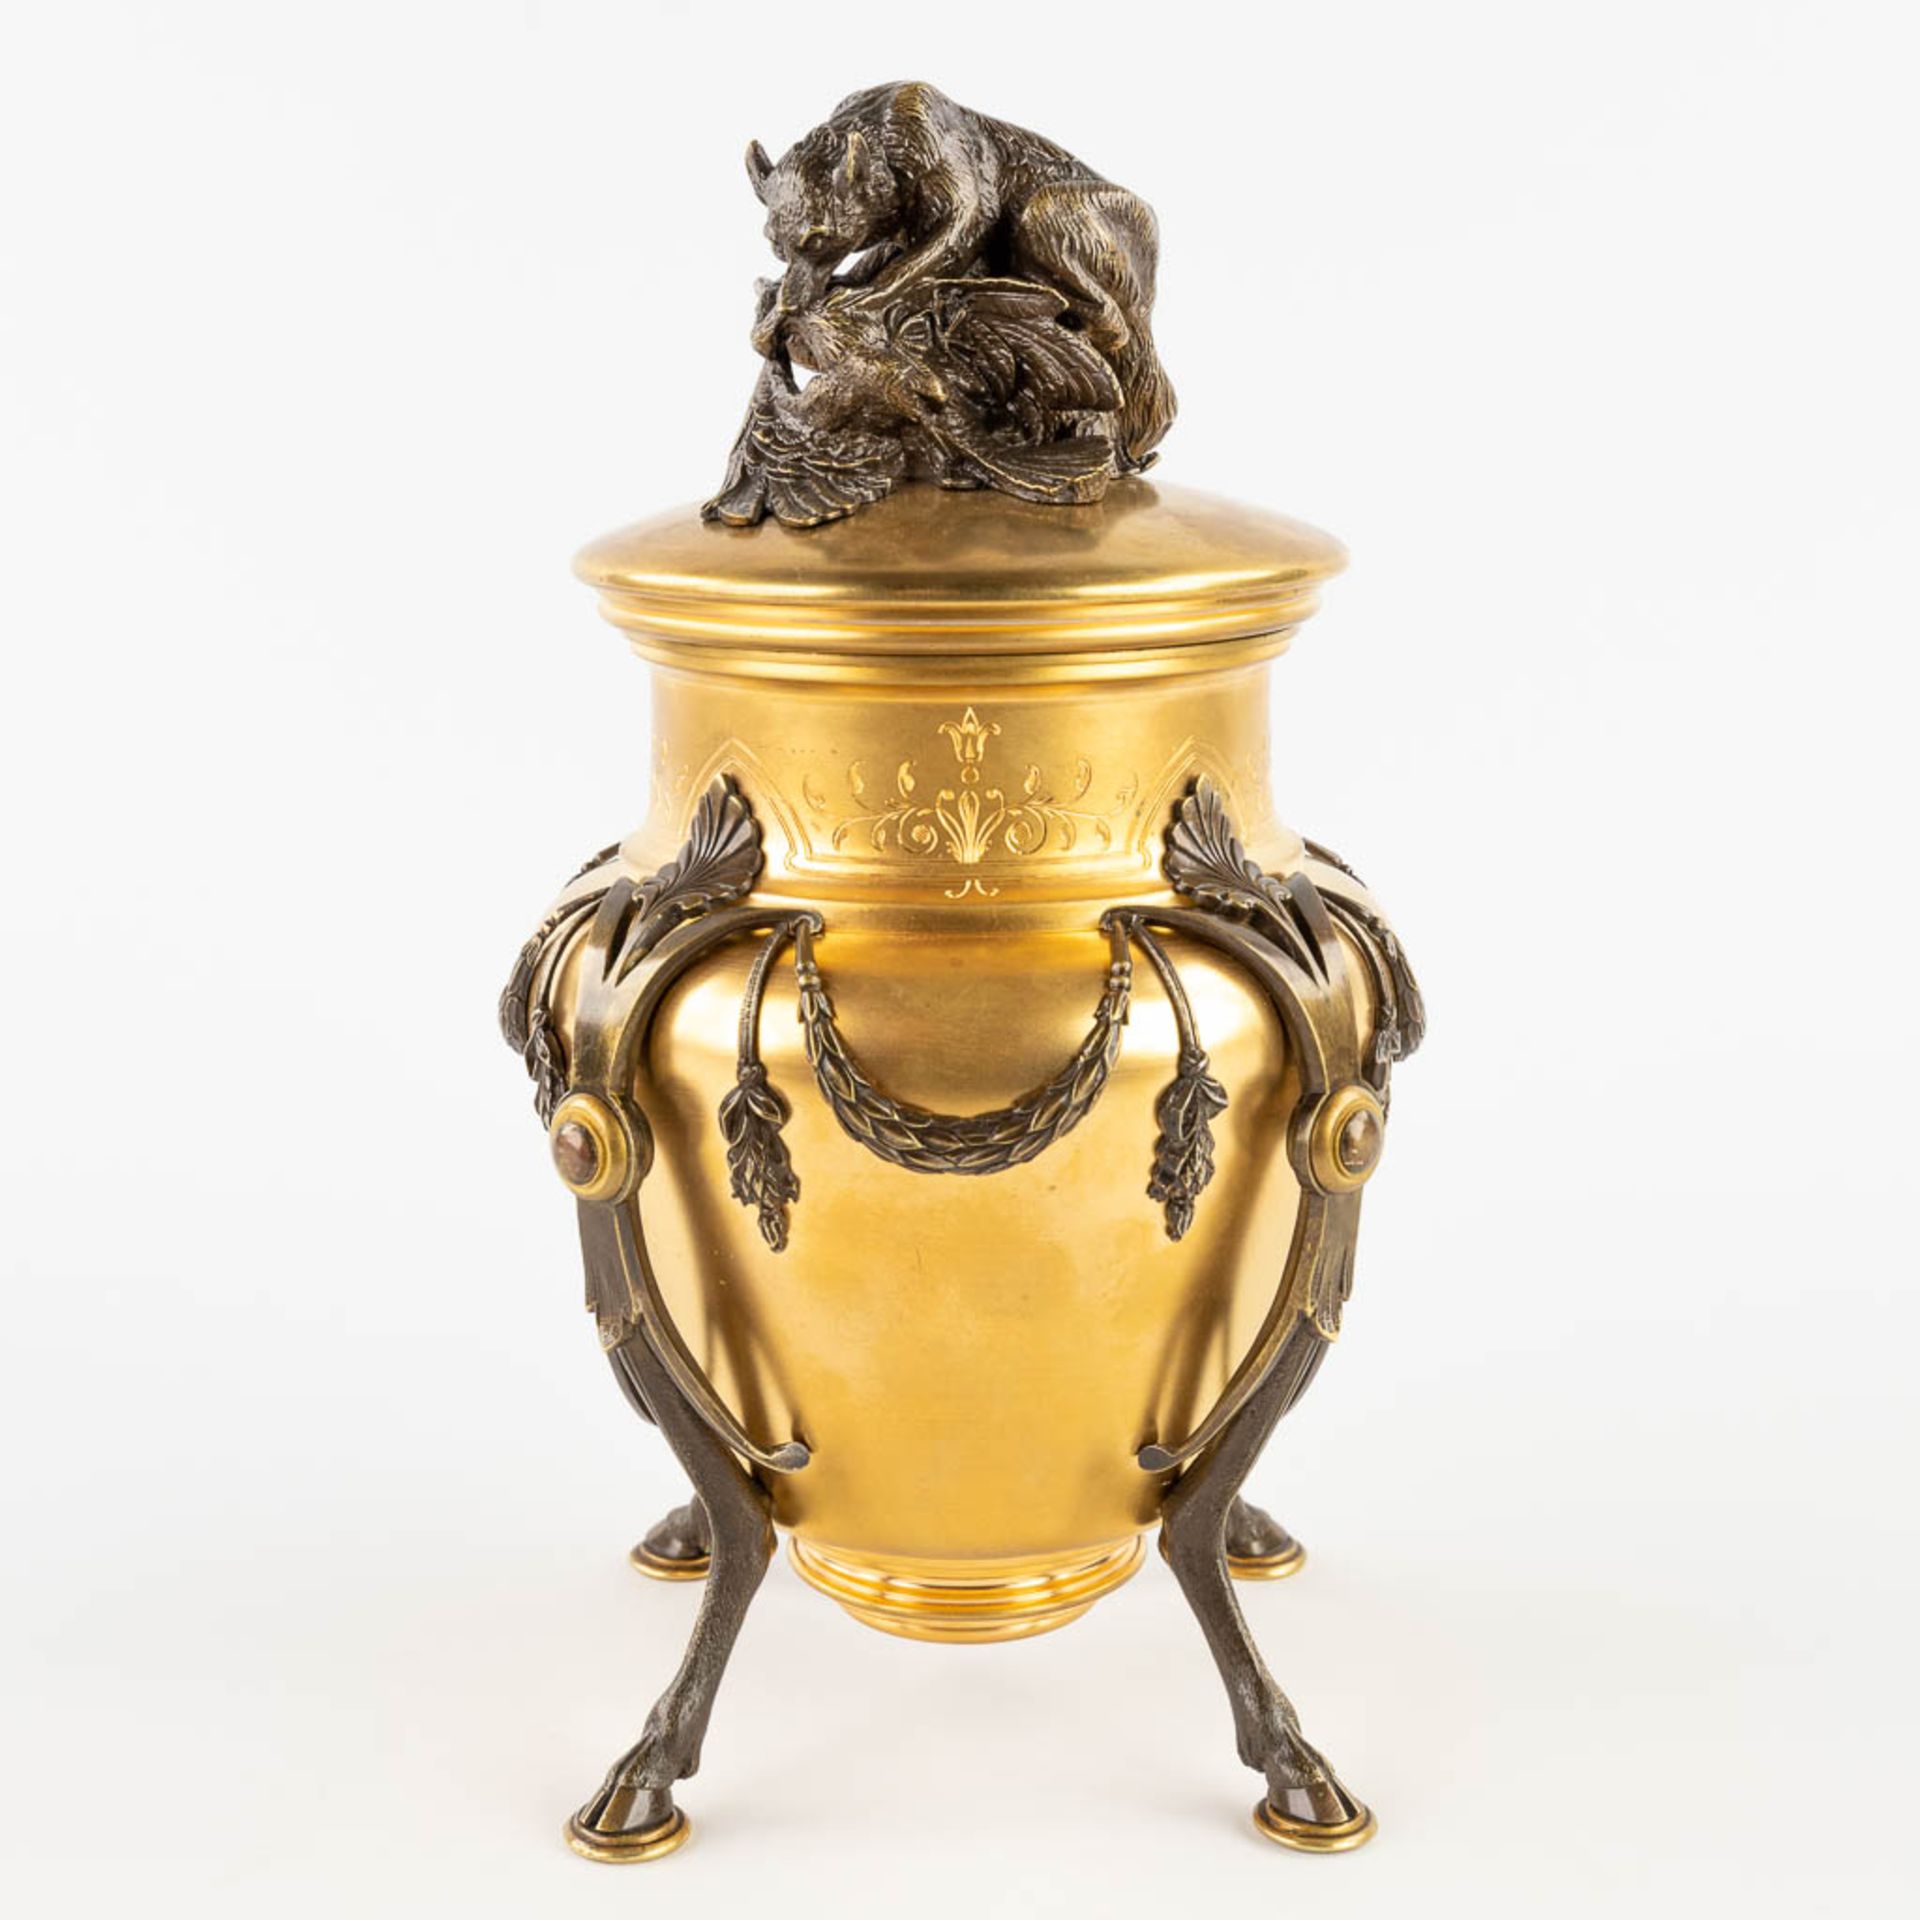 An ice-pail, gilt and patinated bronze decorated with a Wolf eating a large bird. 19th C. (H: 28 x D